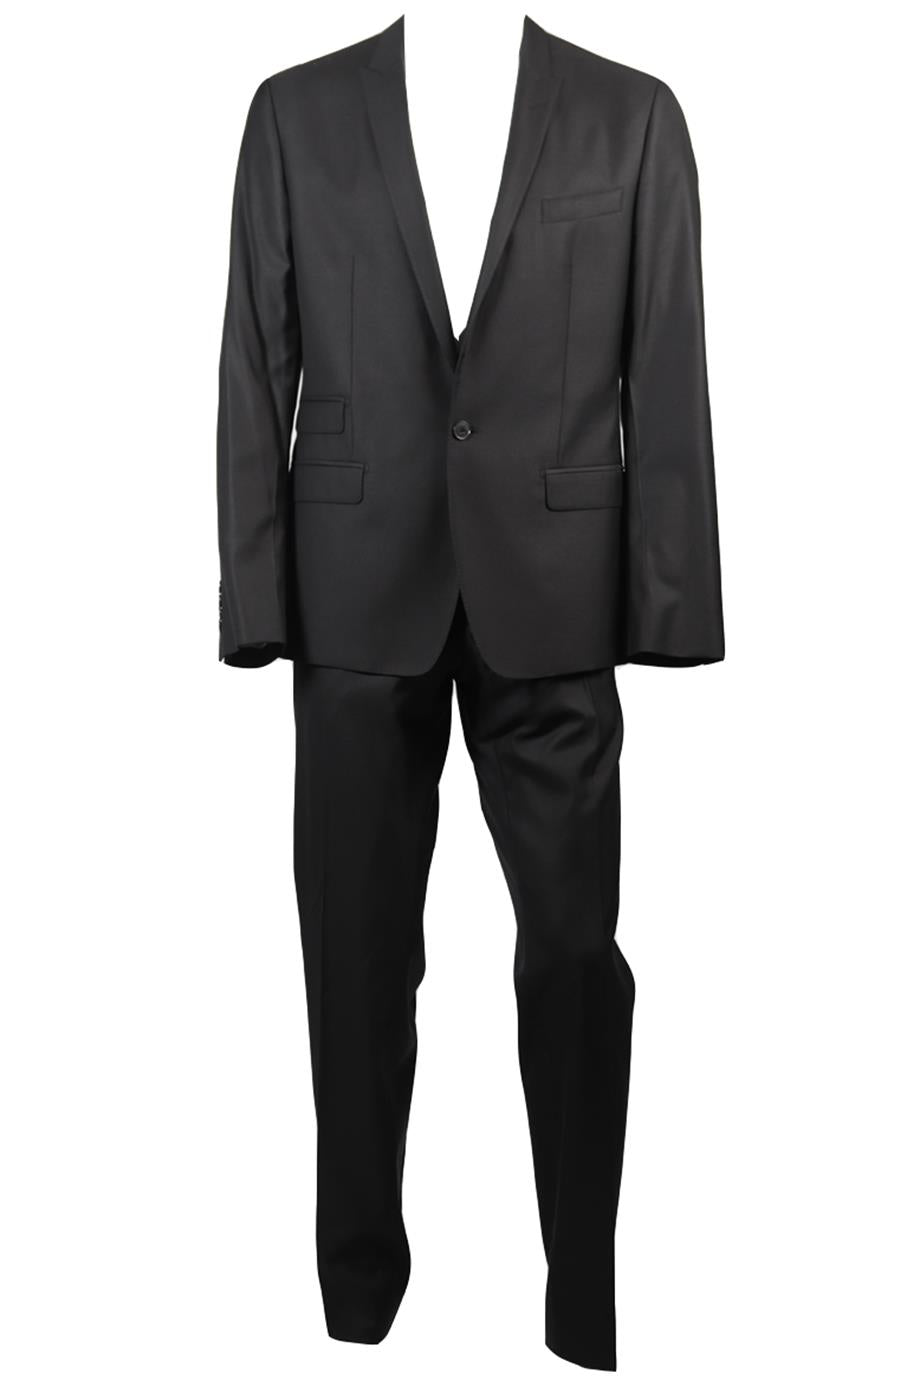 DOLCE & GABBANA MEN'S WOOL AND SILK BLEND TWO PIECE SUIT IT 50 UK/US 34 FR 42